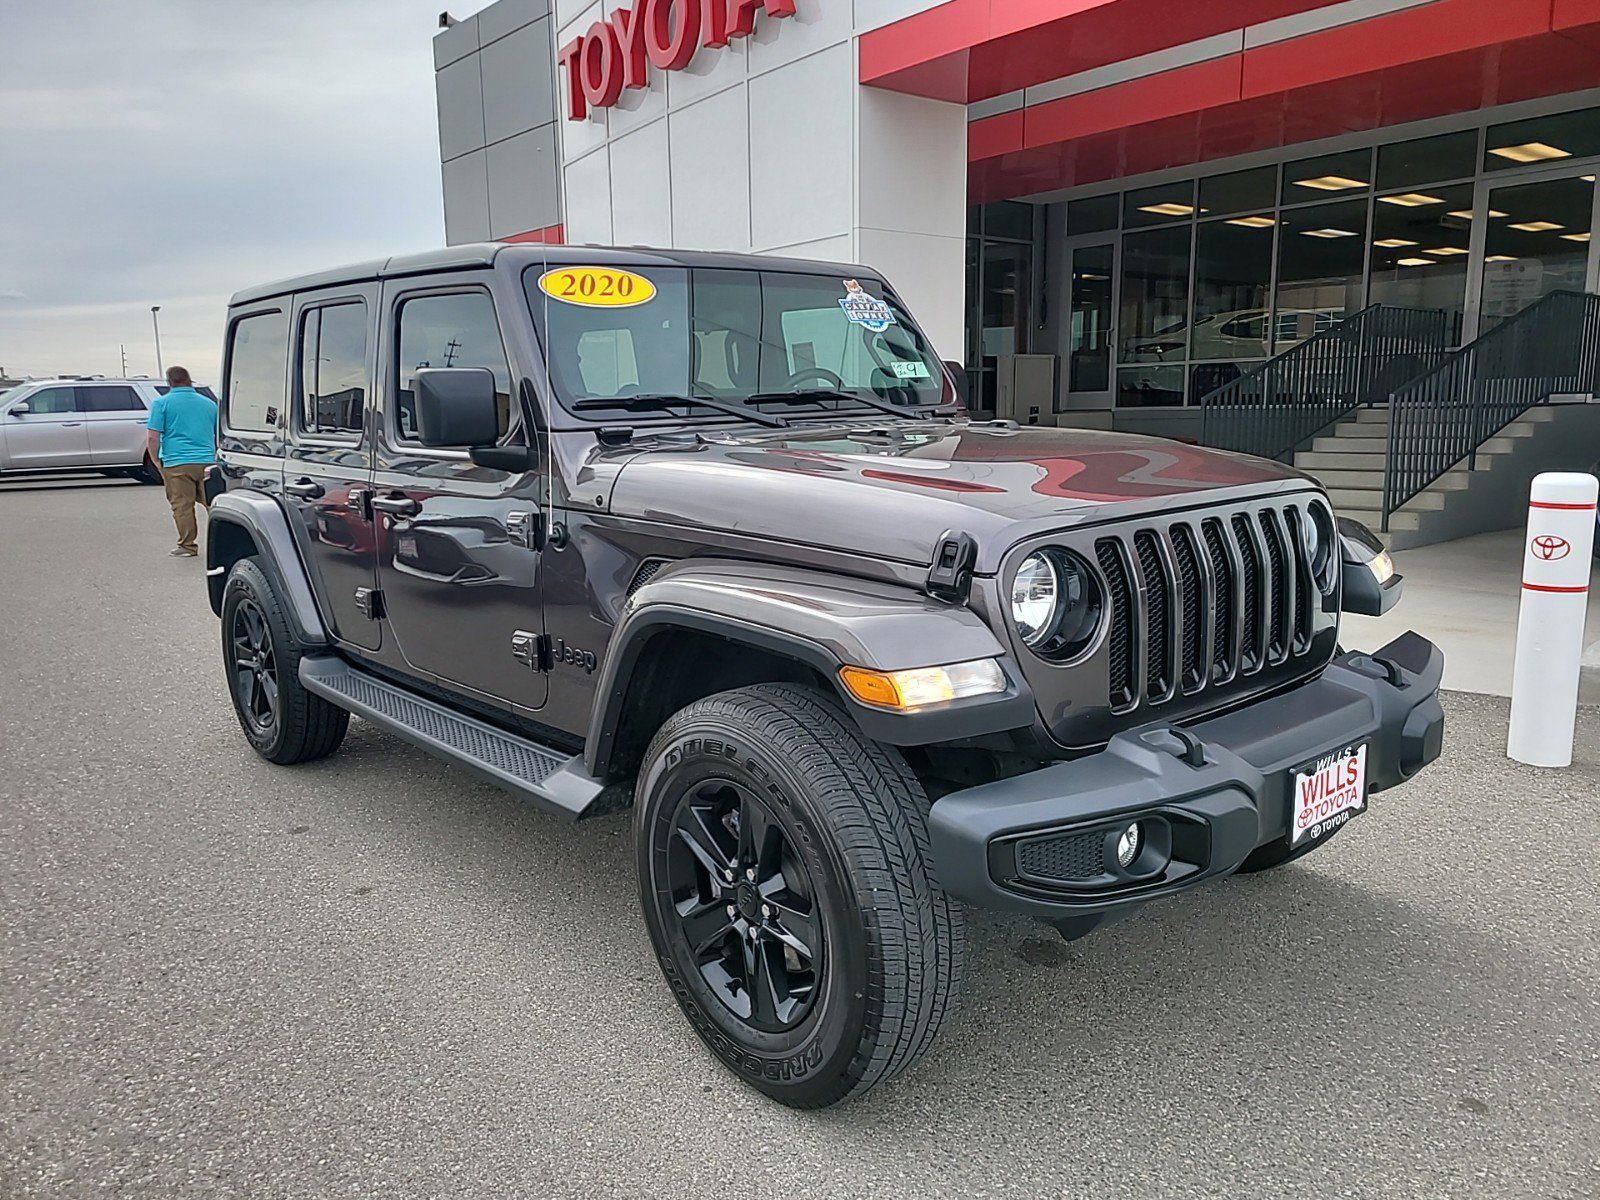 2020 - Jeep - Wrangler Unlimited - $42,997